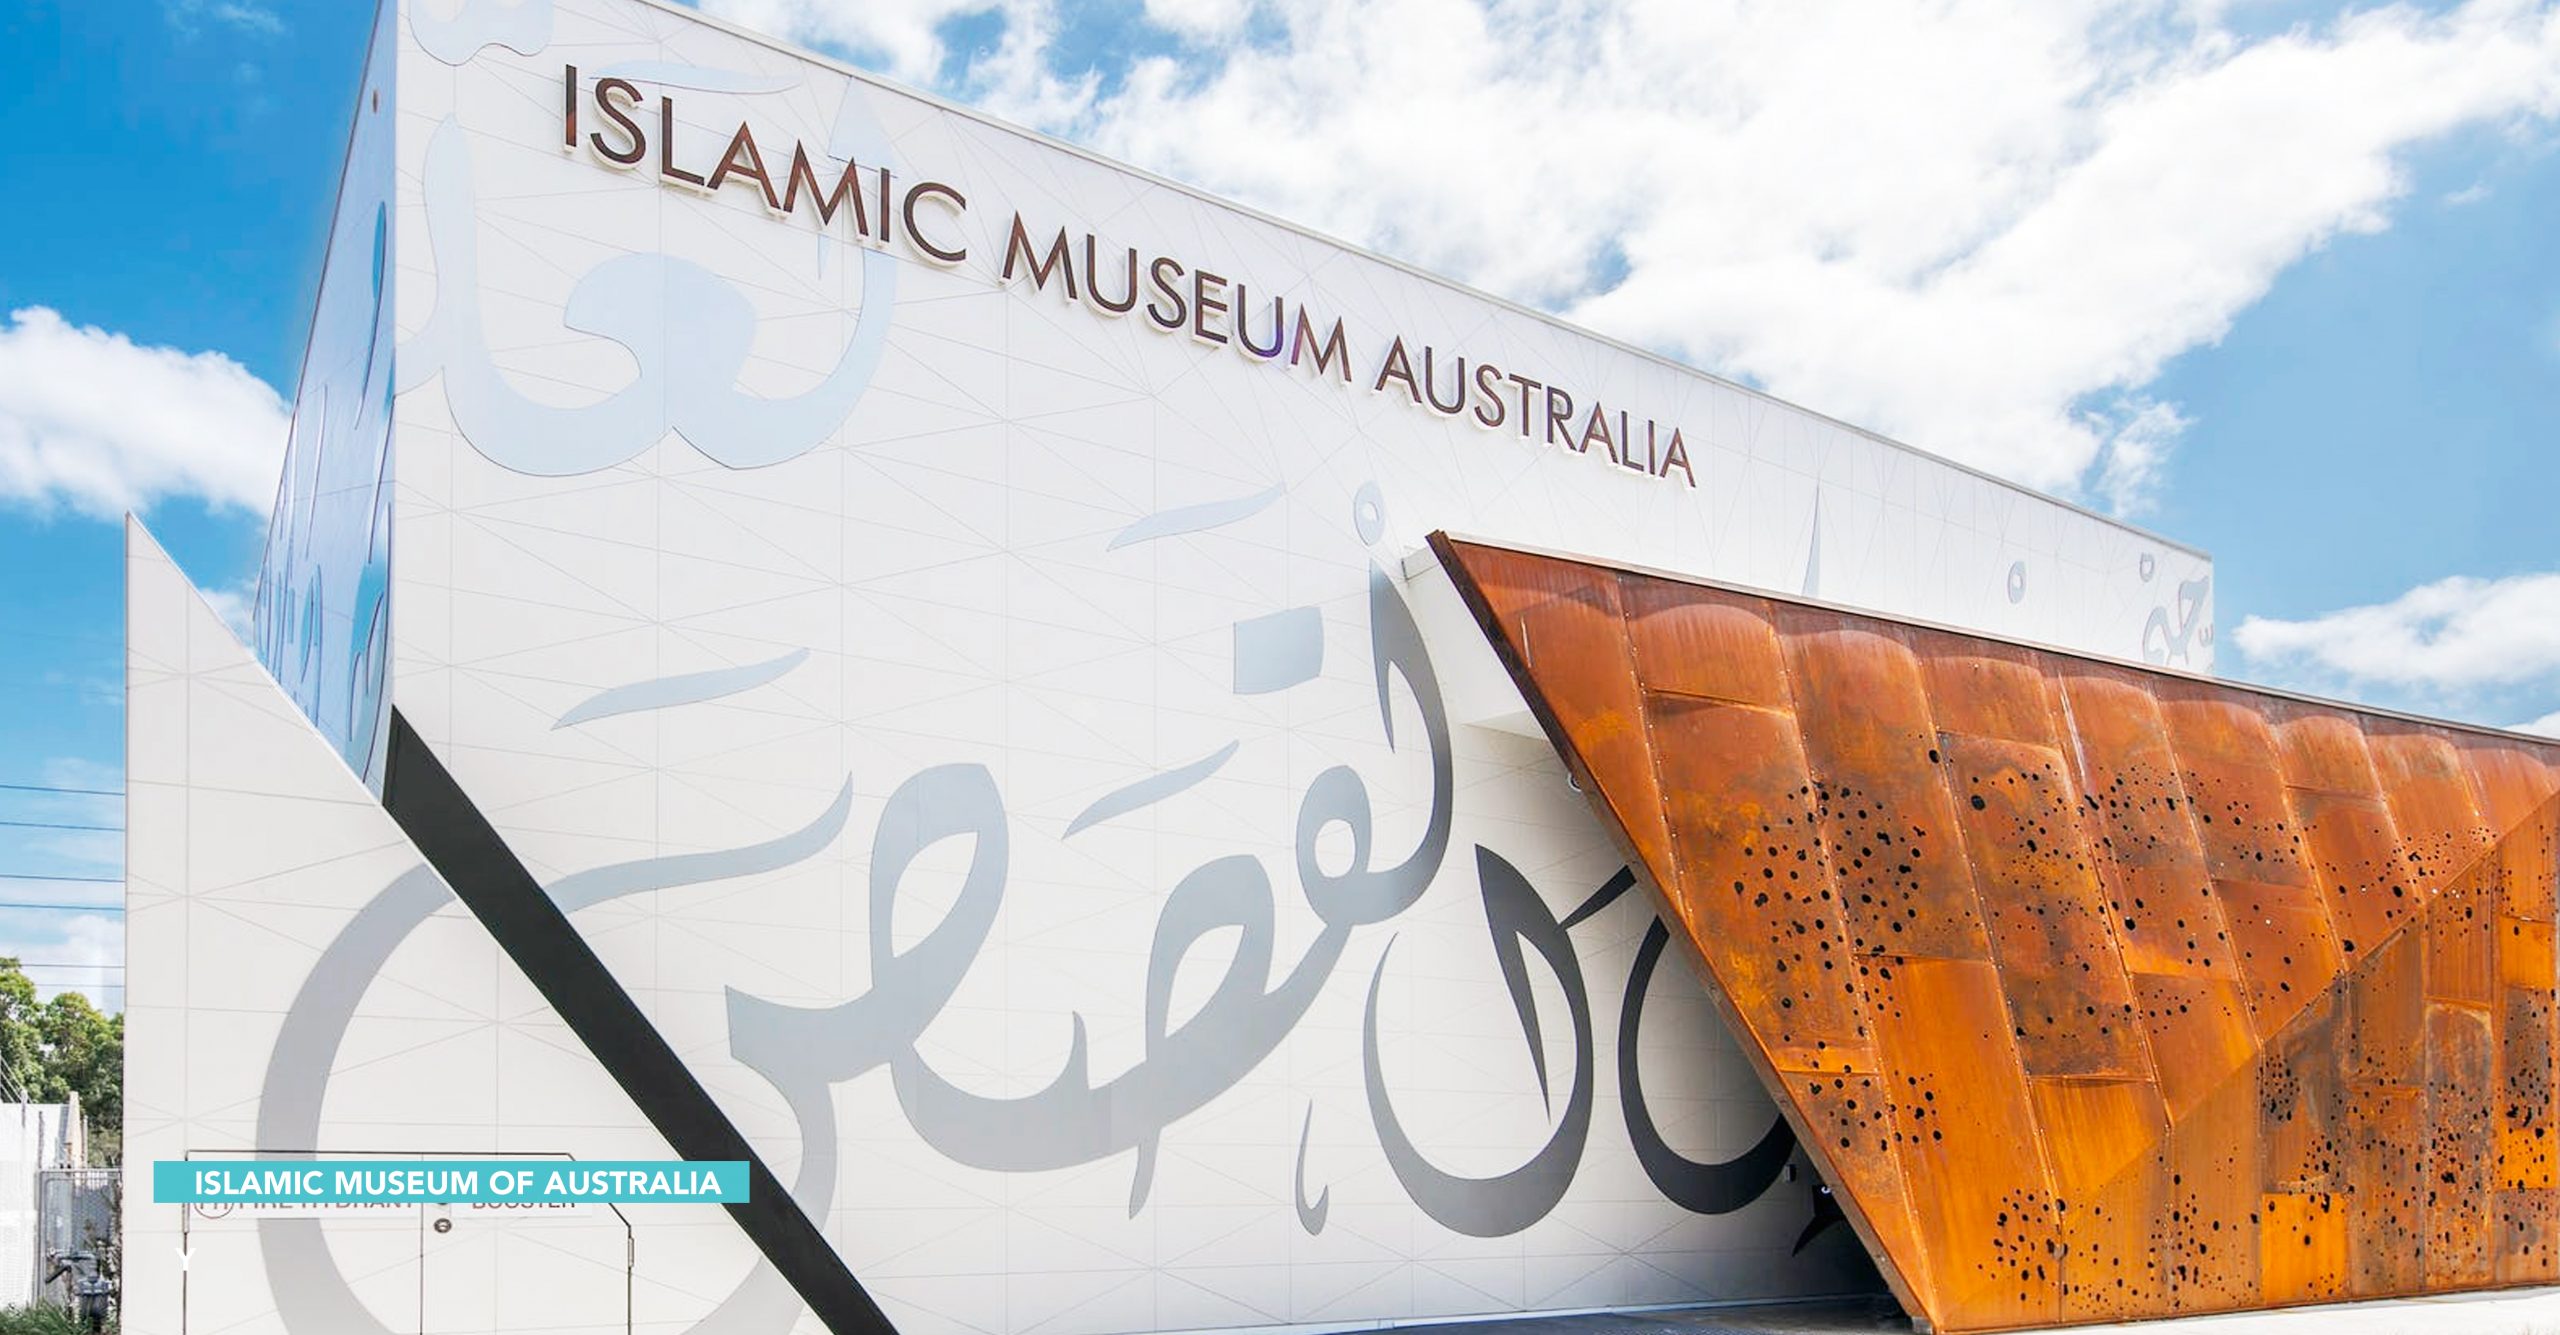 Be amazed at the well-curated displays at Islamic Museum of Australia